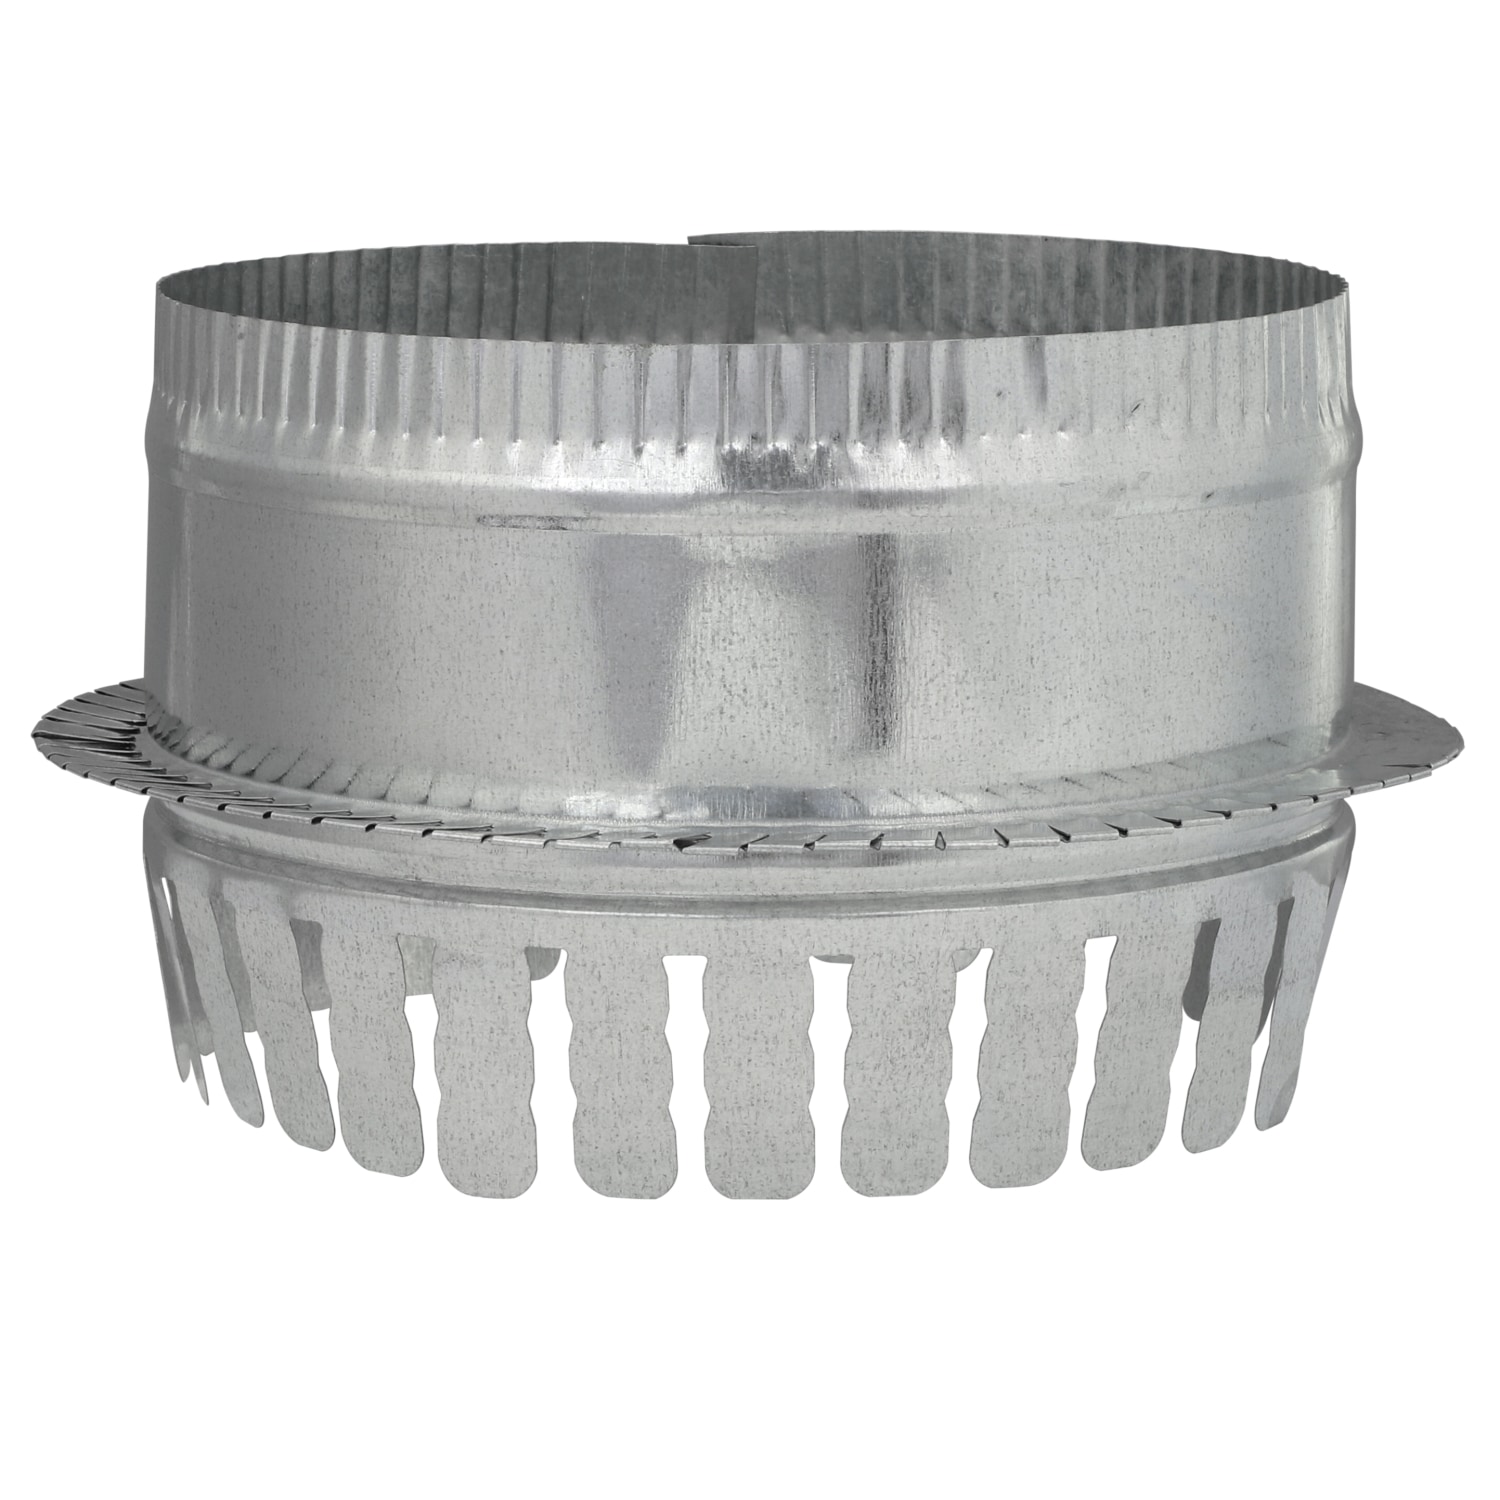 8" Duct Collar Galvanized Steel Air Tight Gasketed 